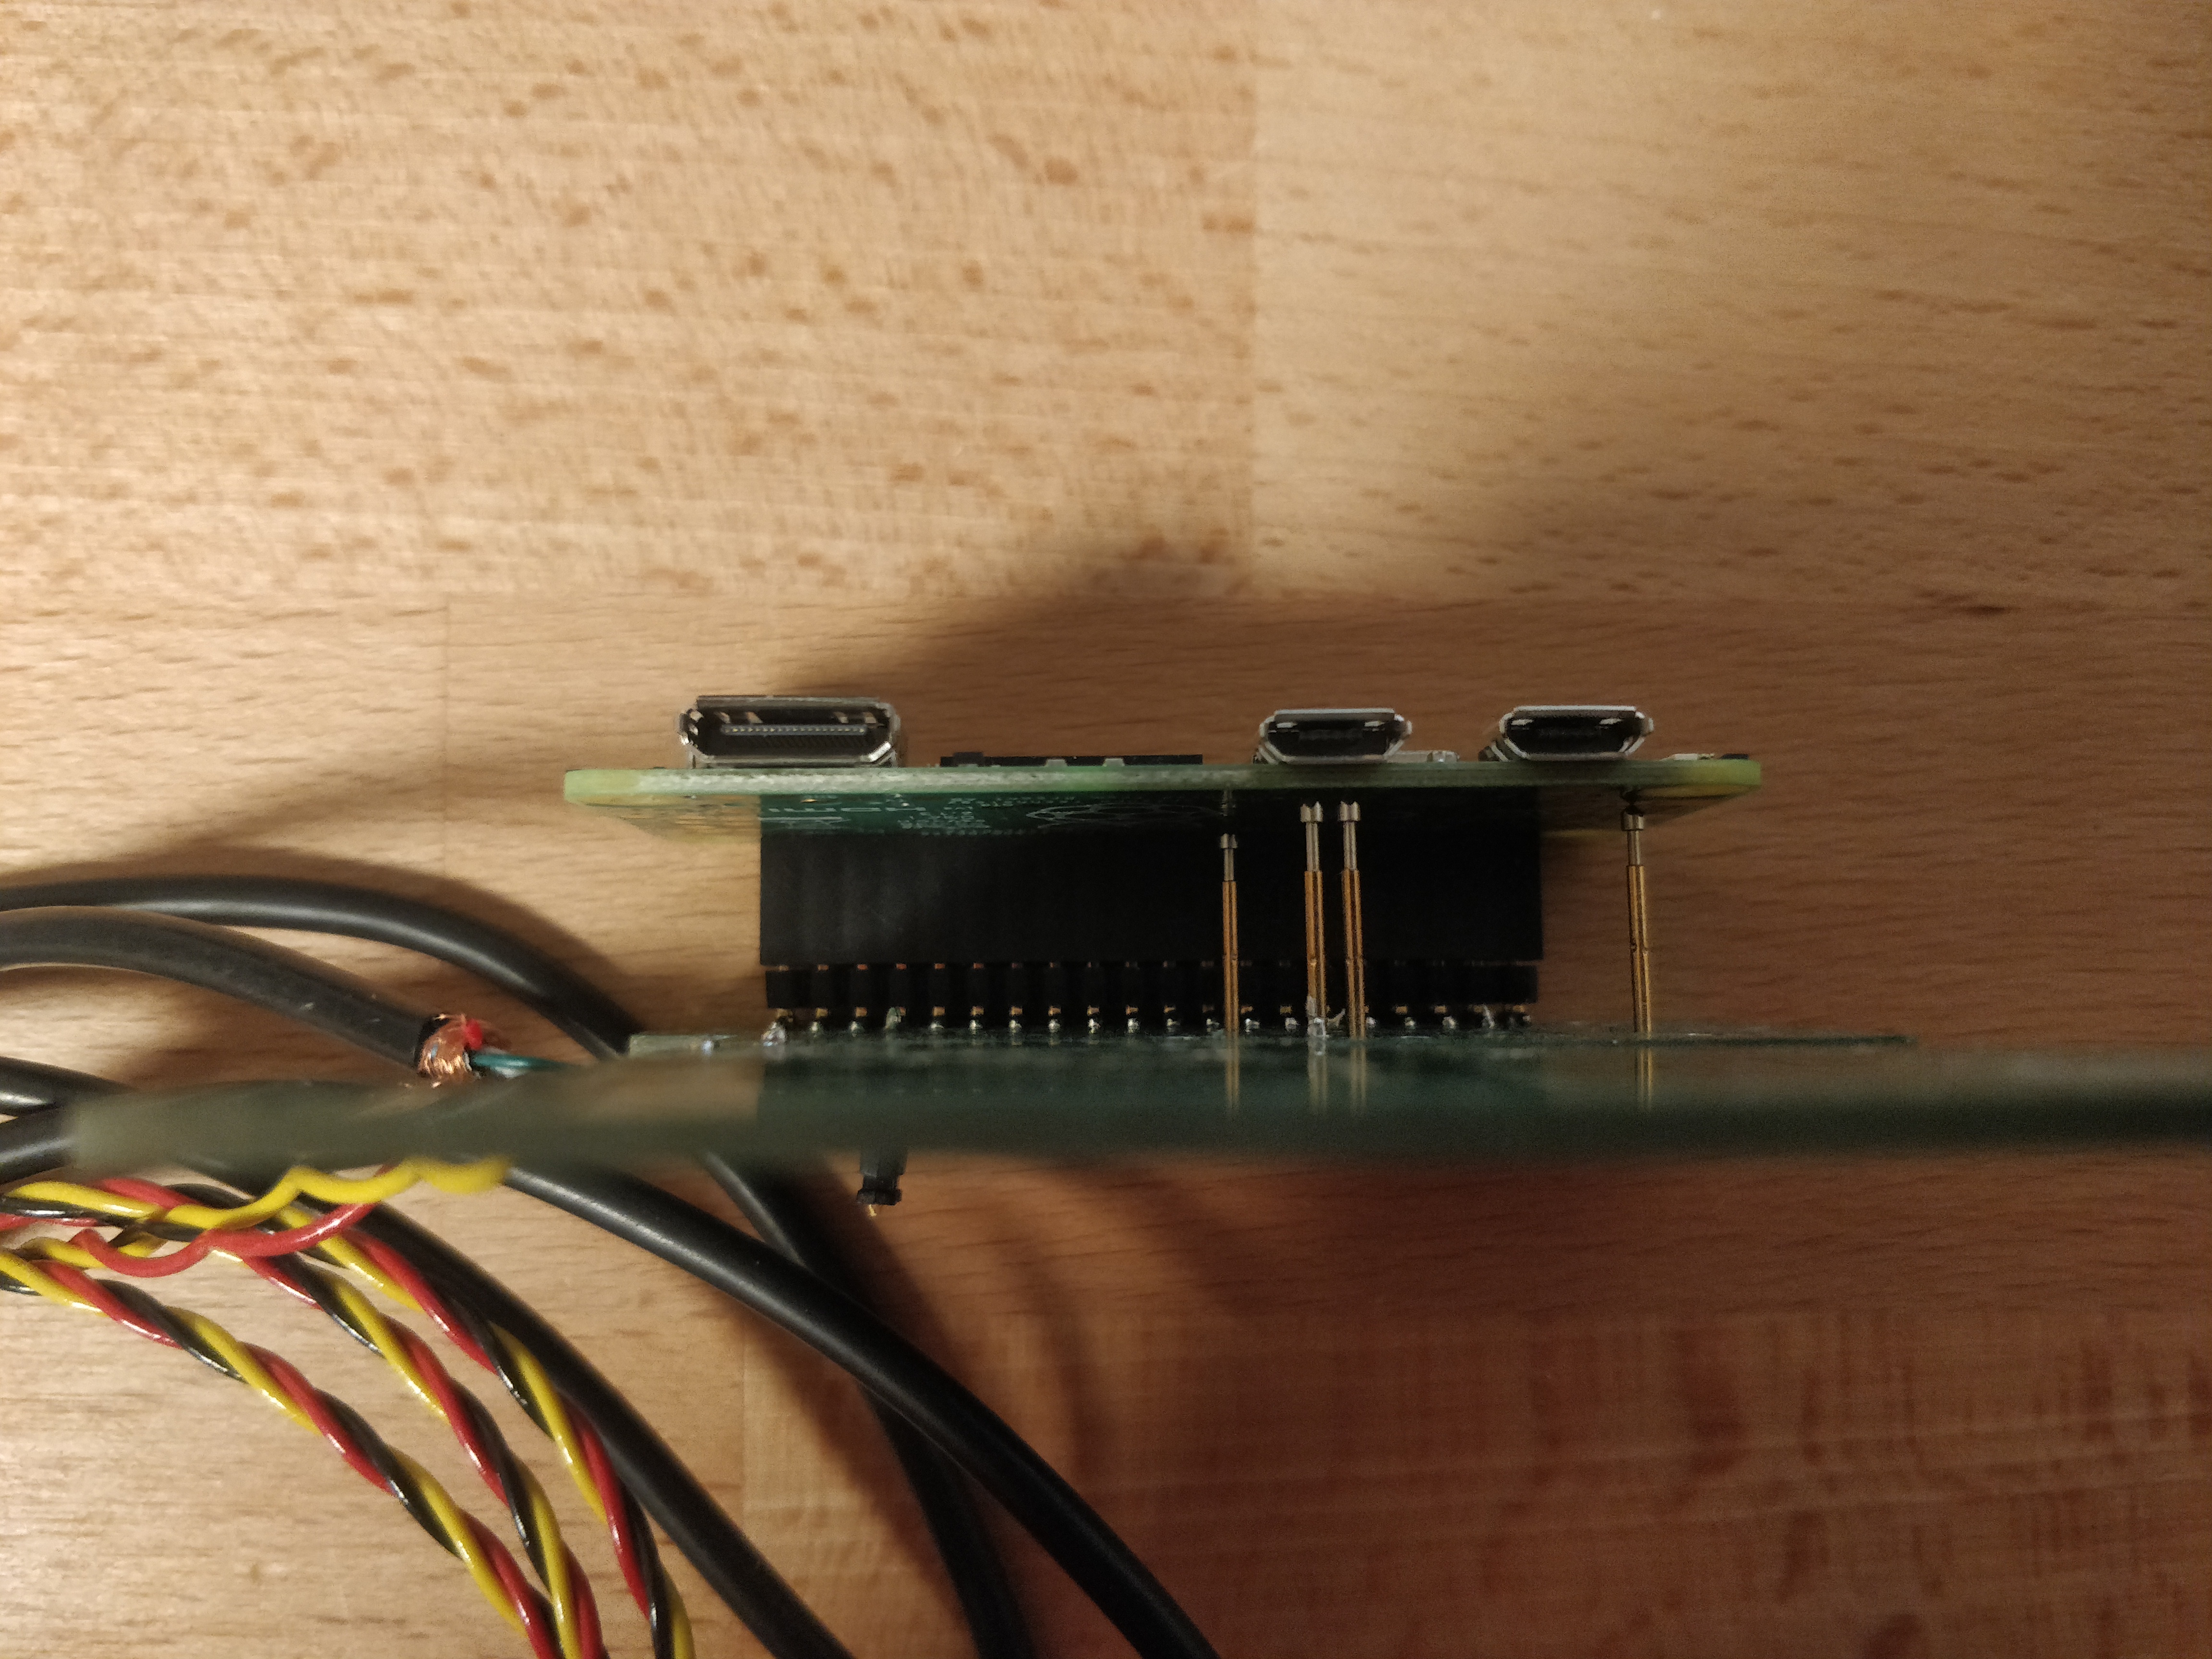 Probe pins used to connect USB to Raspberry Pi